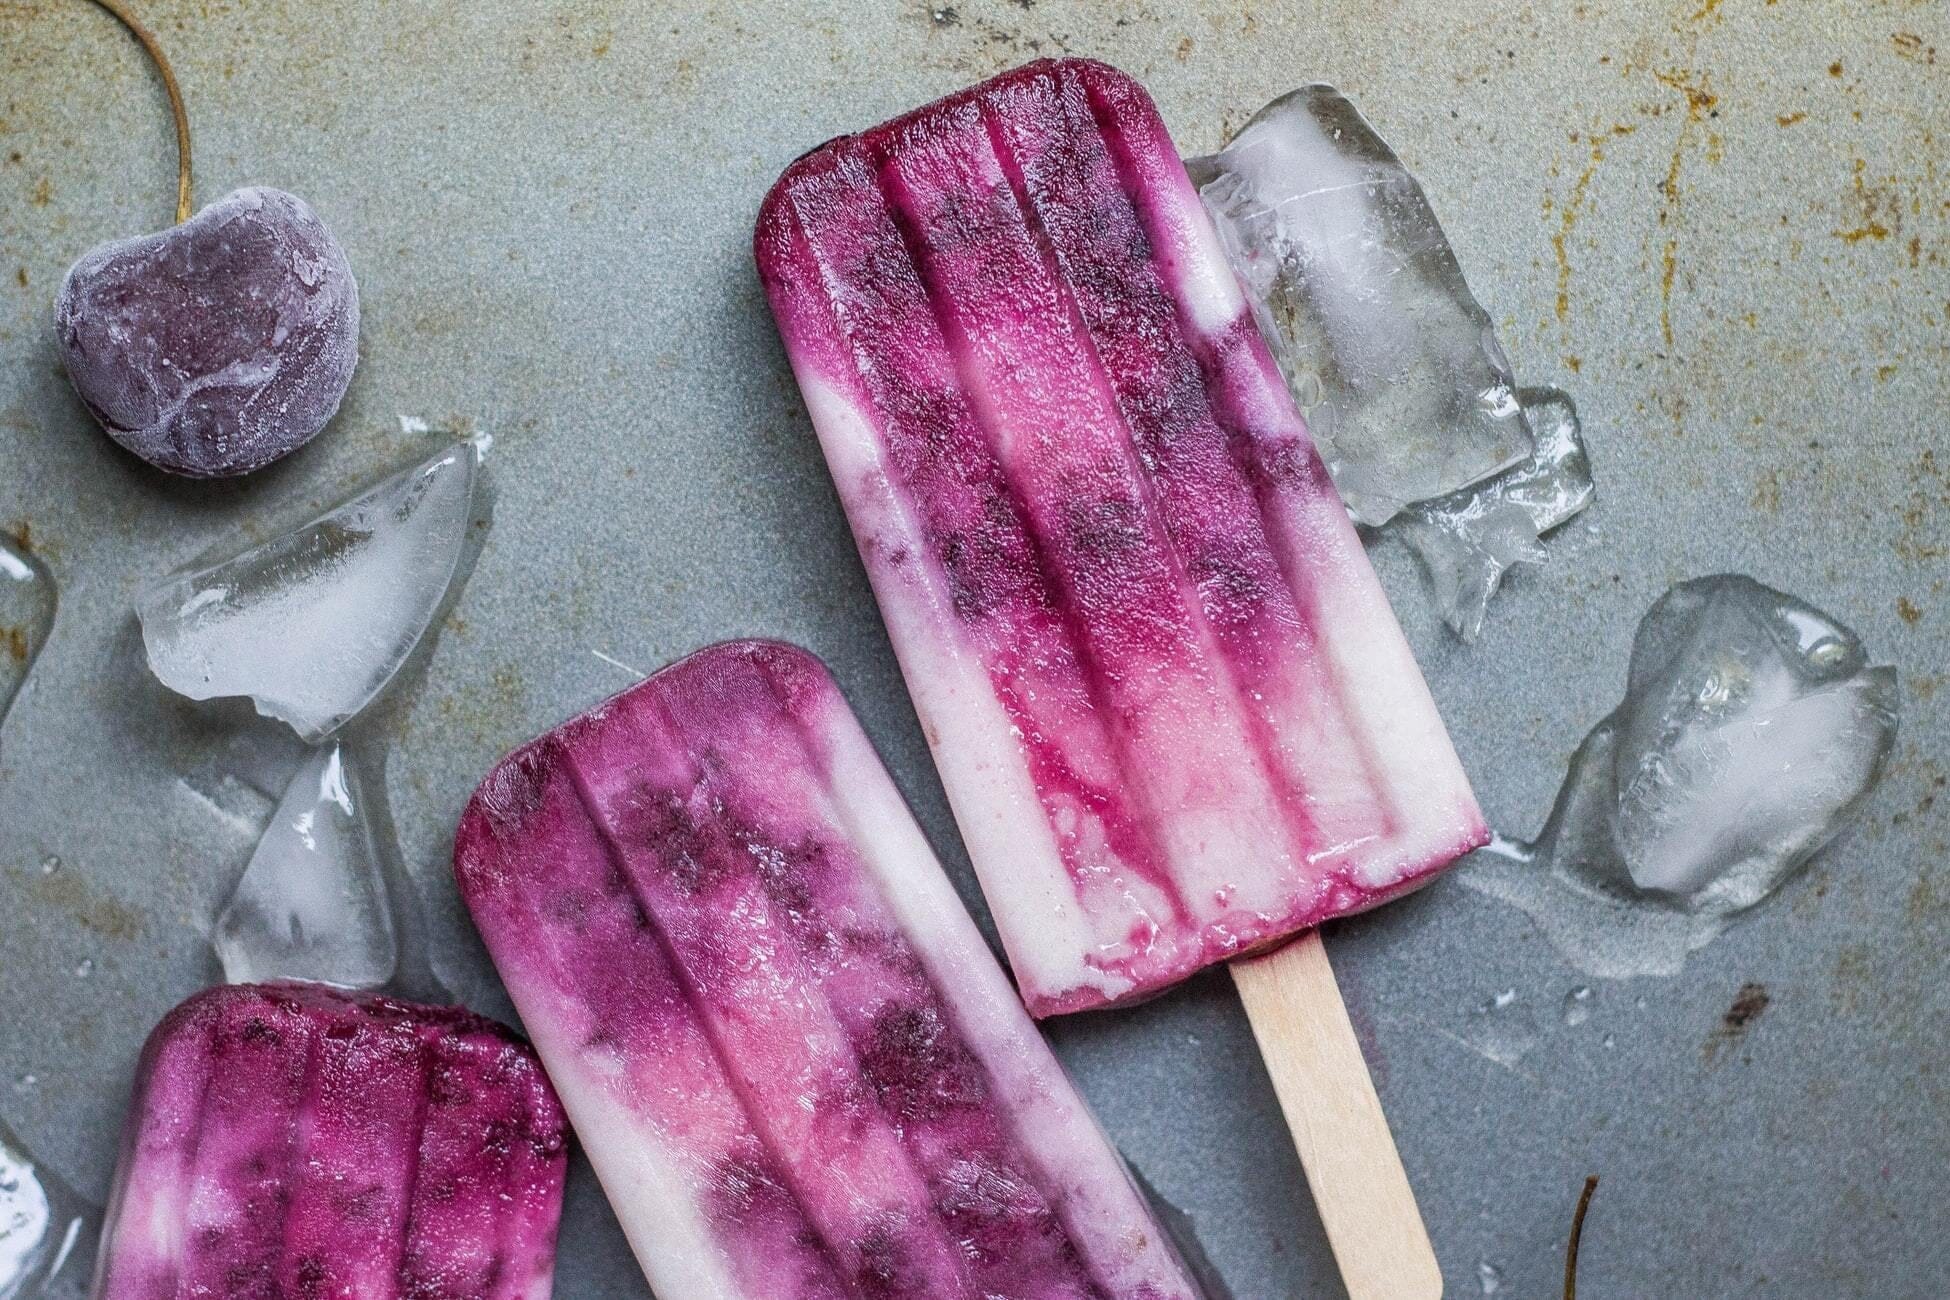 [Recipe] Superfood Popsicles